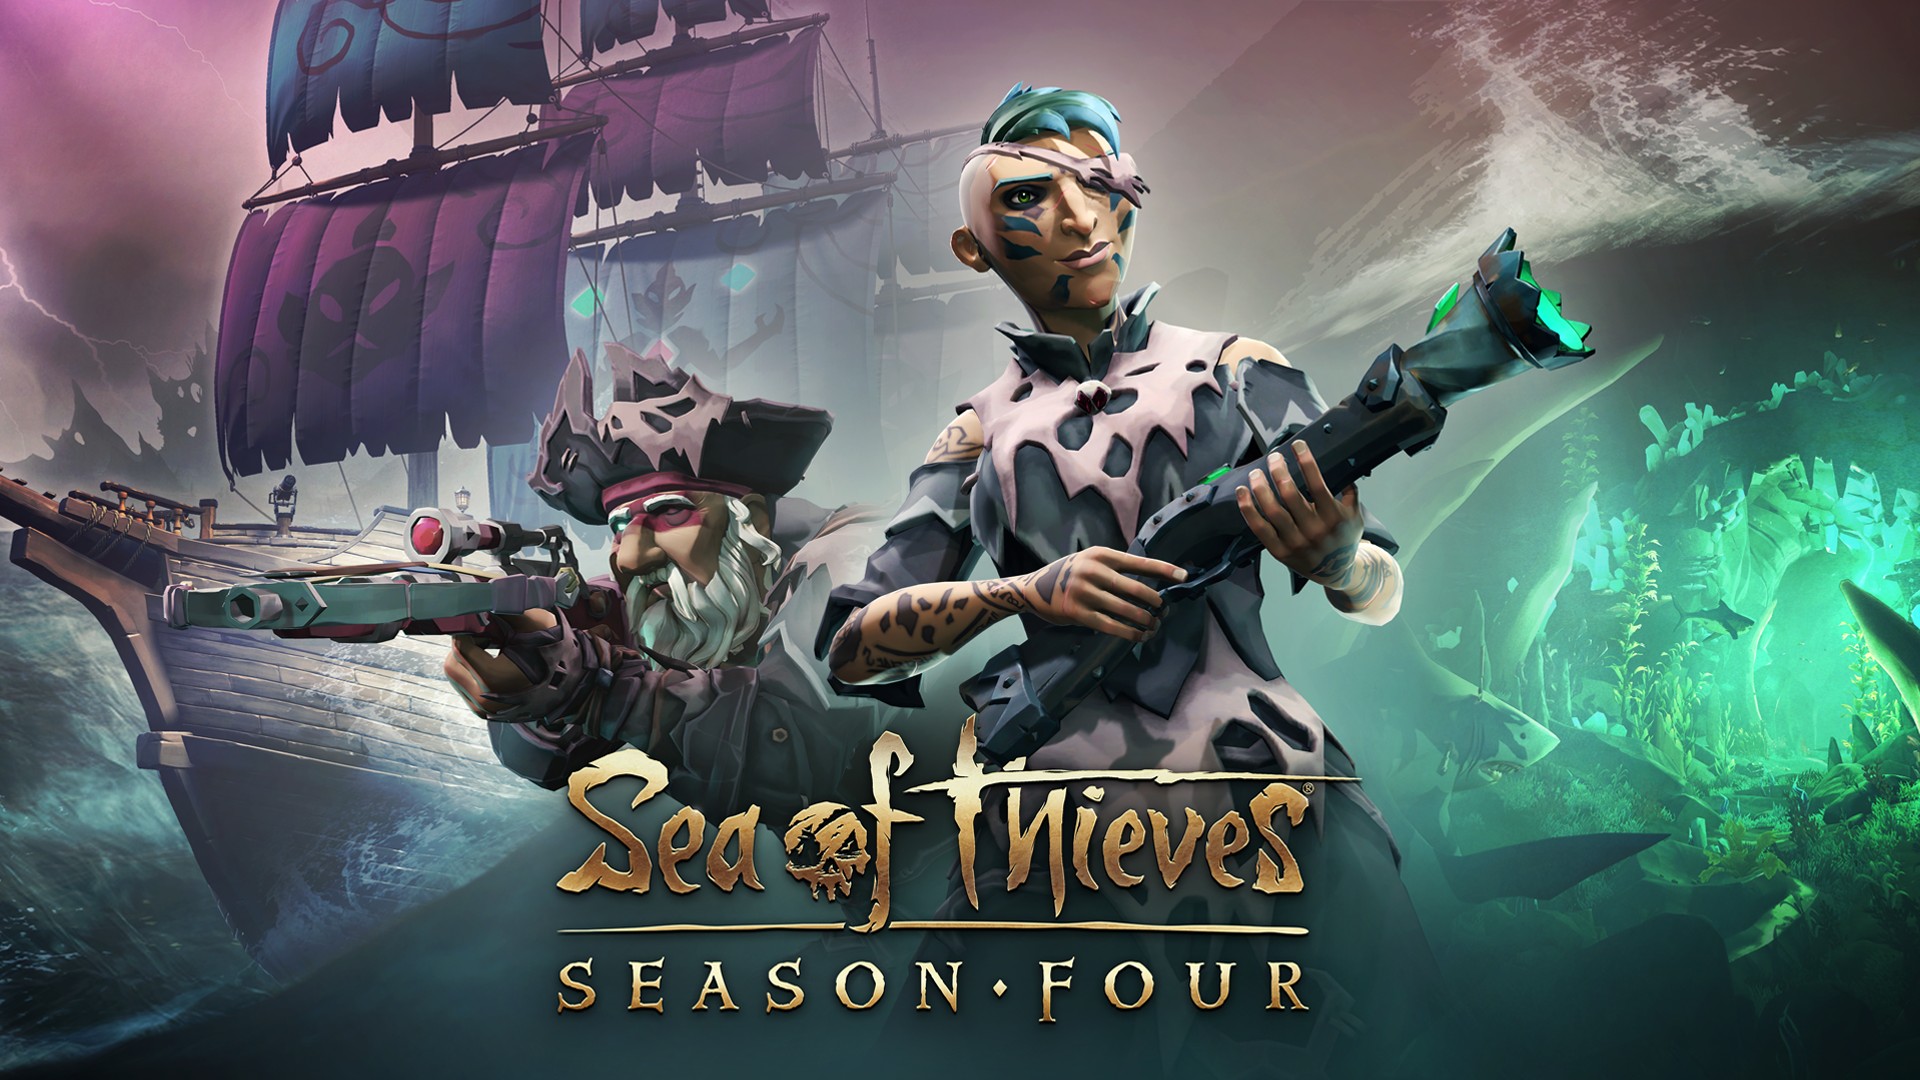 SEA OF THIEVES free Download PC Game (Full Version)